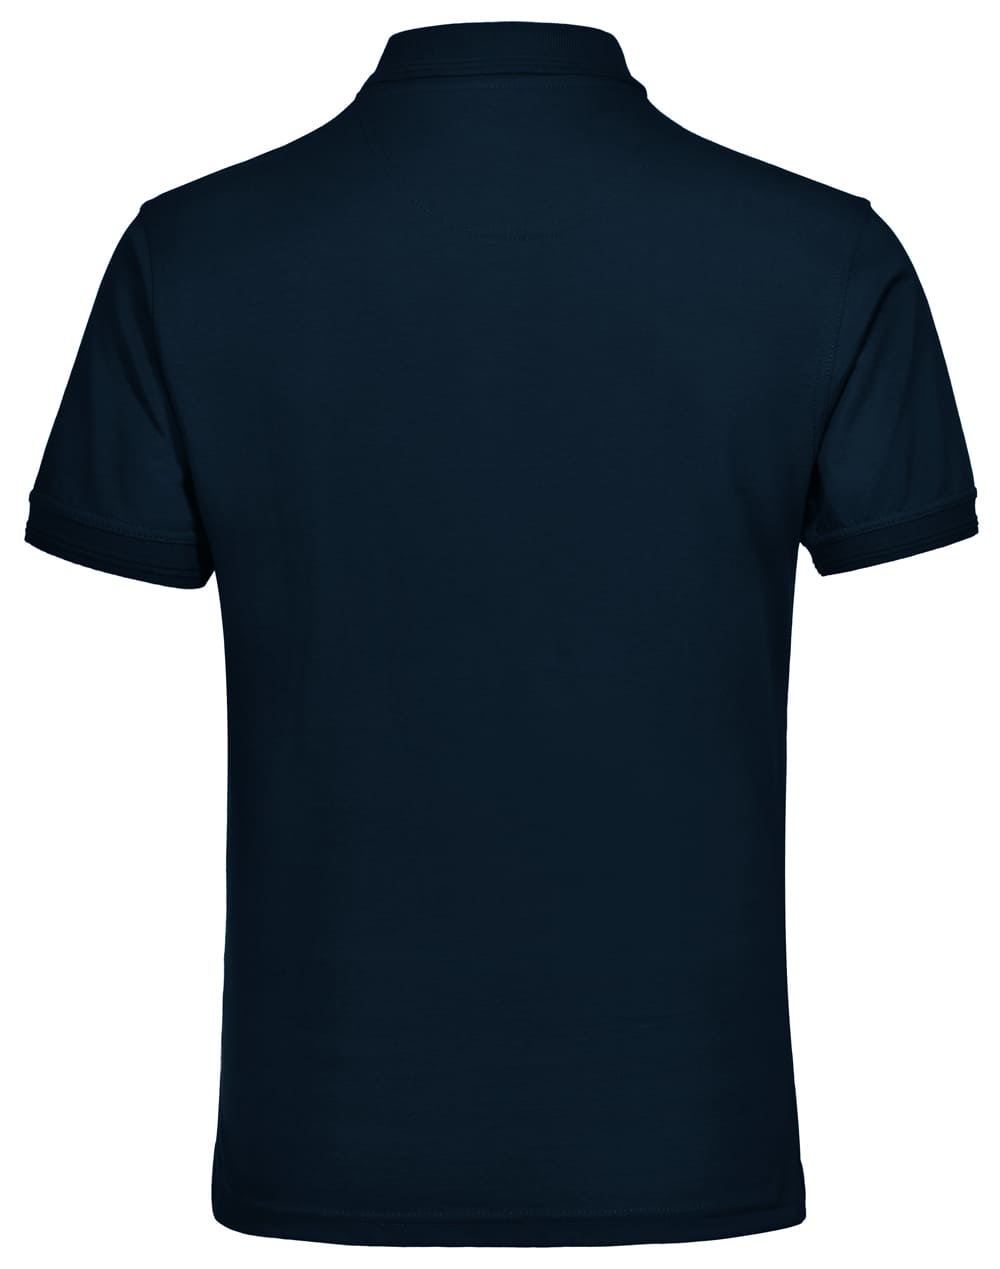 Custom (Navy) Macquarie Unisex Contrast Cotton Kit Polos Online in Perth